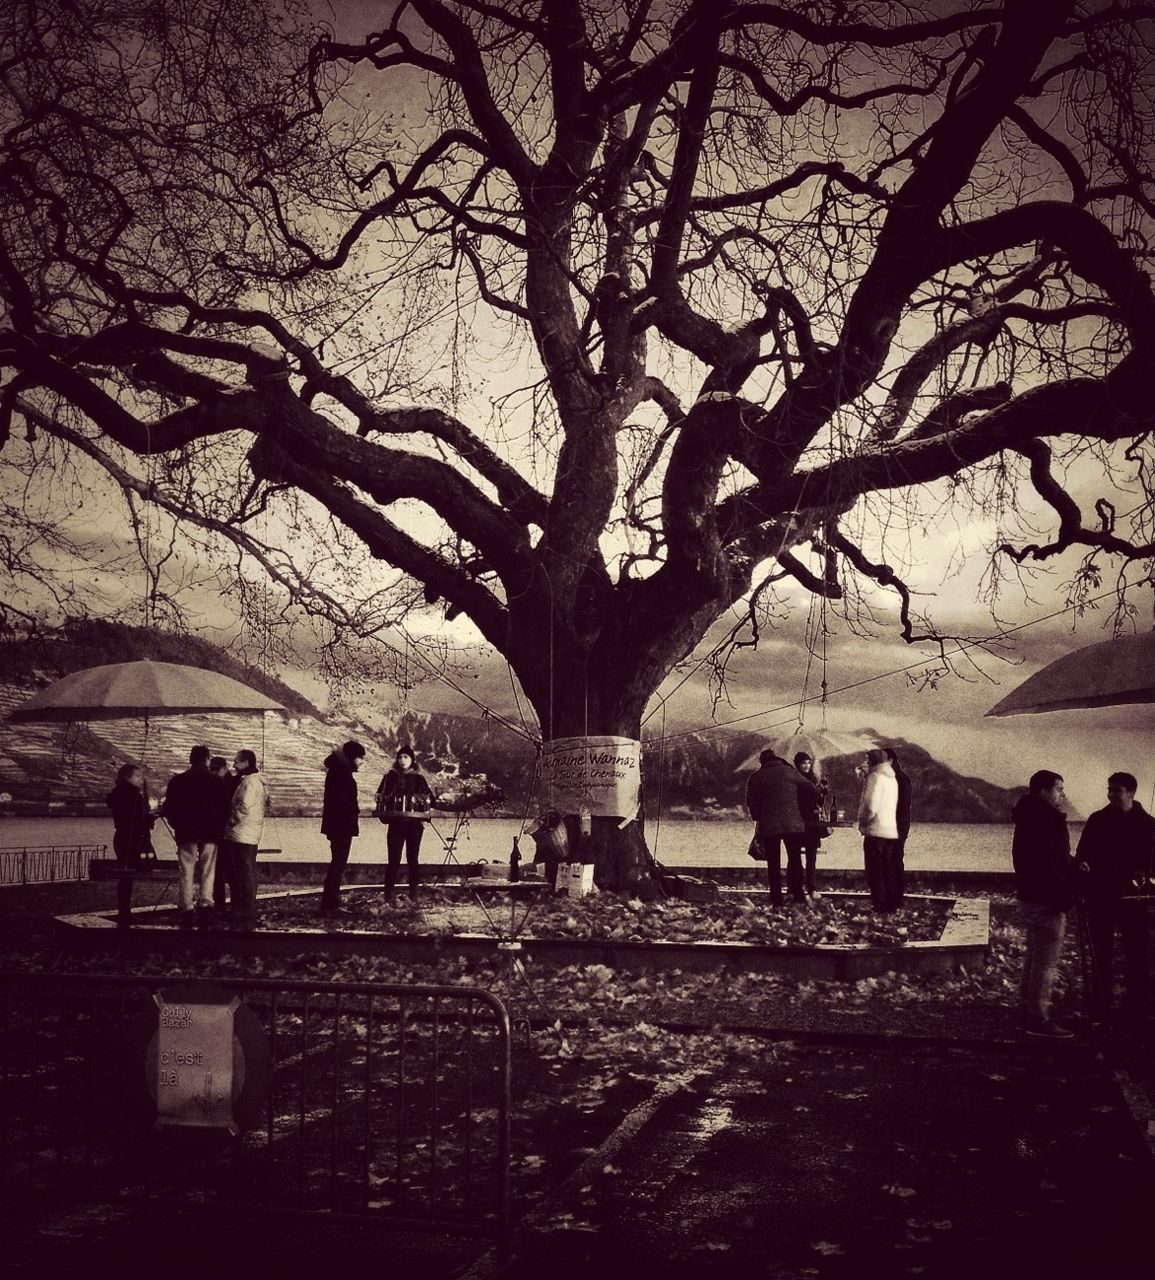 bare tree, silhouette, tree, men, lifestyles, leisure activity, person, branch, large group of people, nature, walking, medium group of people, outdoors, tourist, togetherness, sky, mixed age range, tranquility, park - man made space